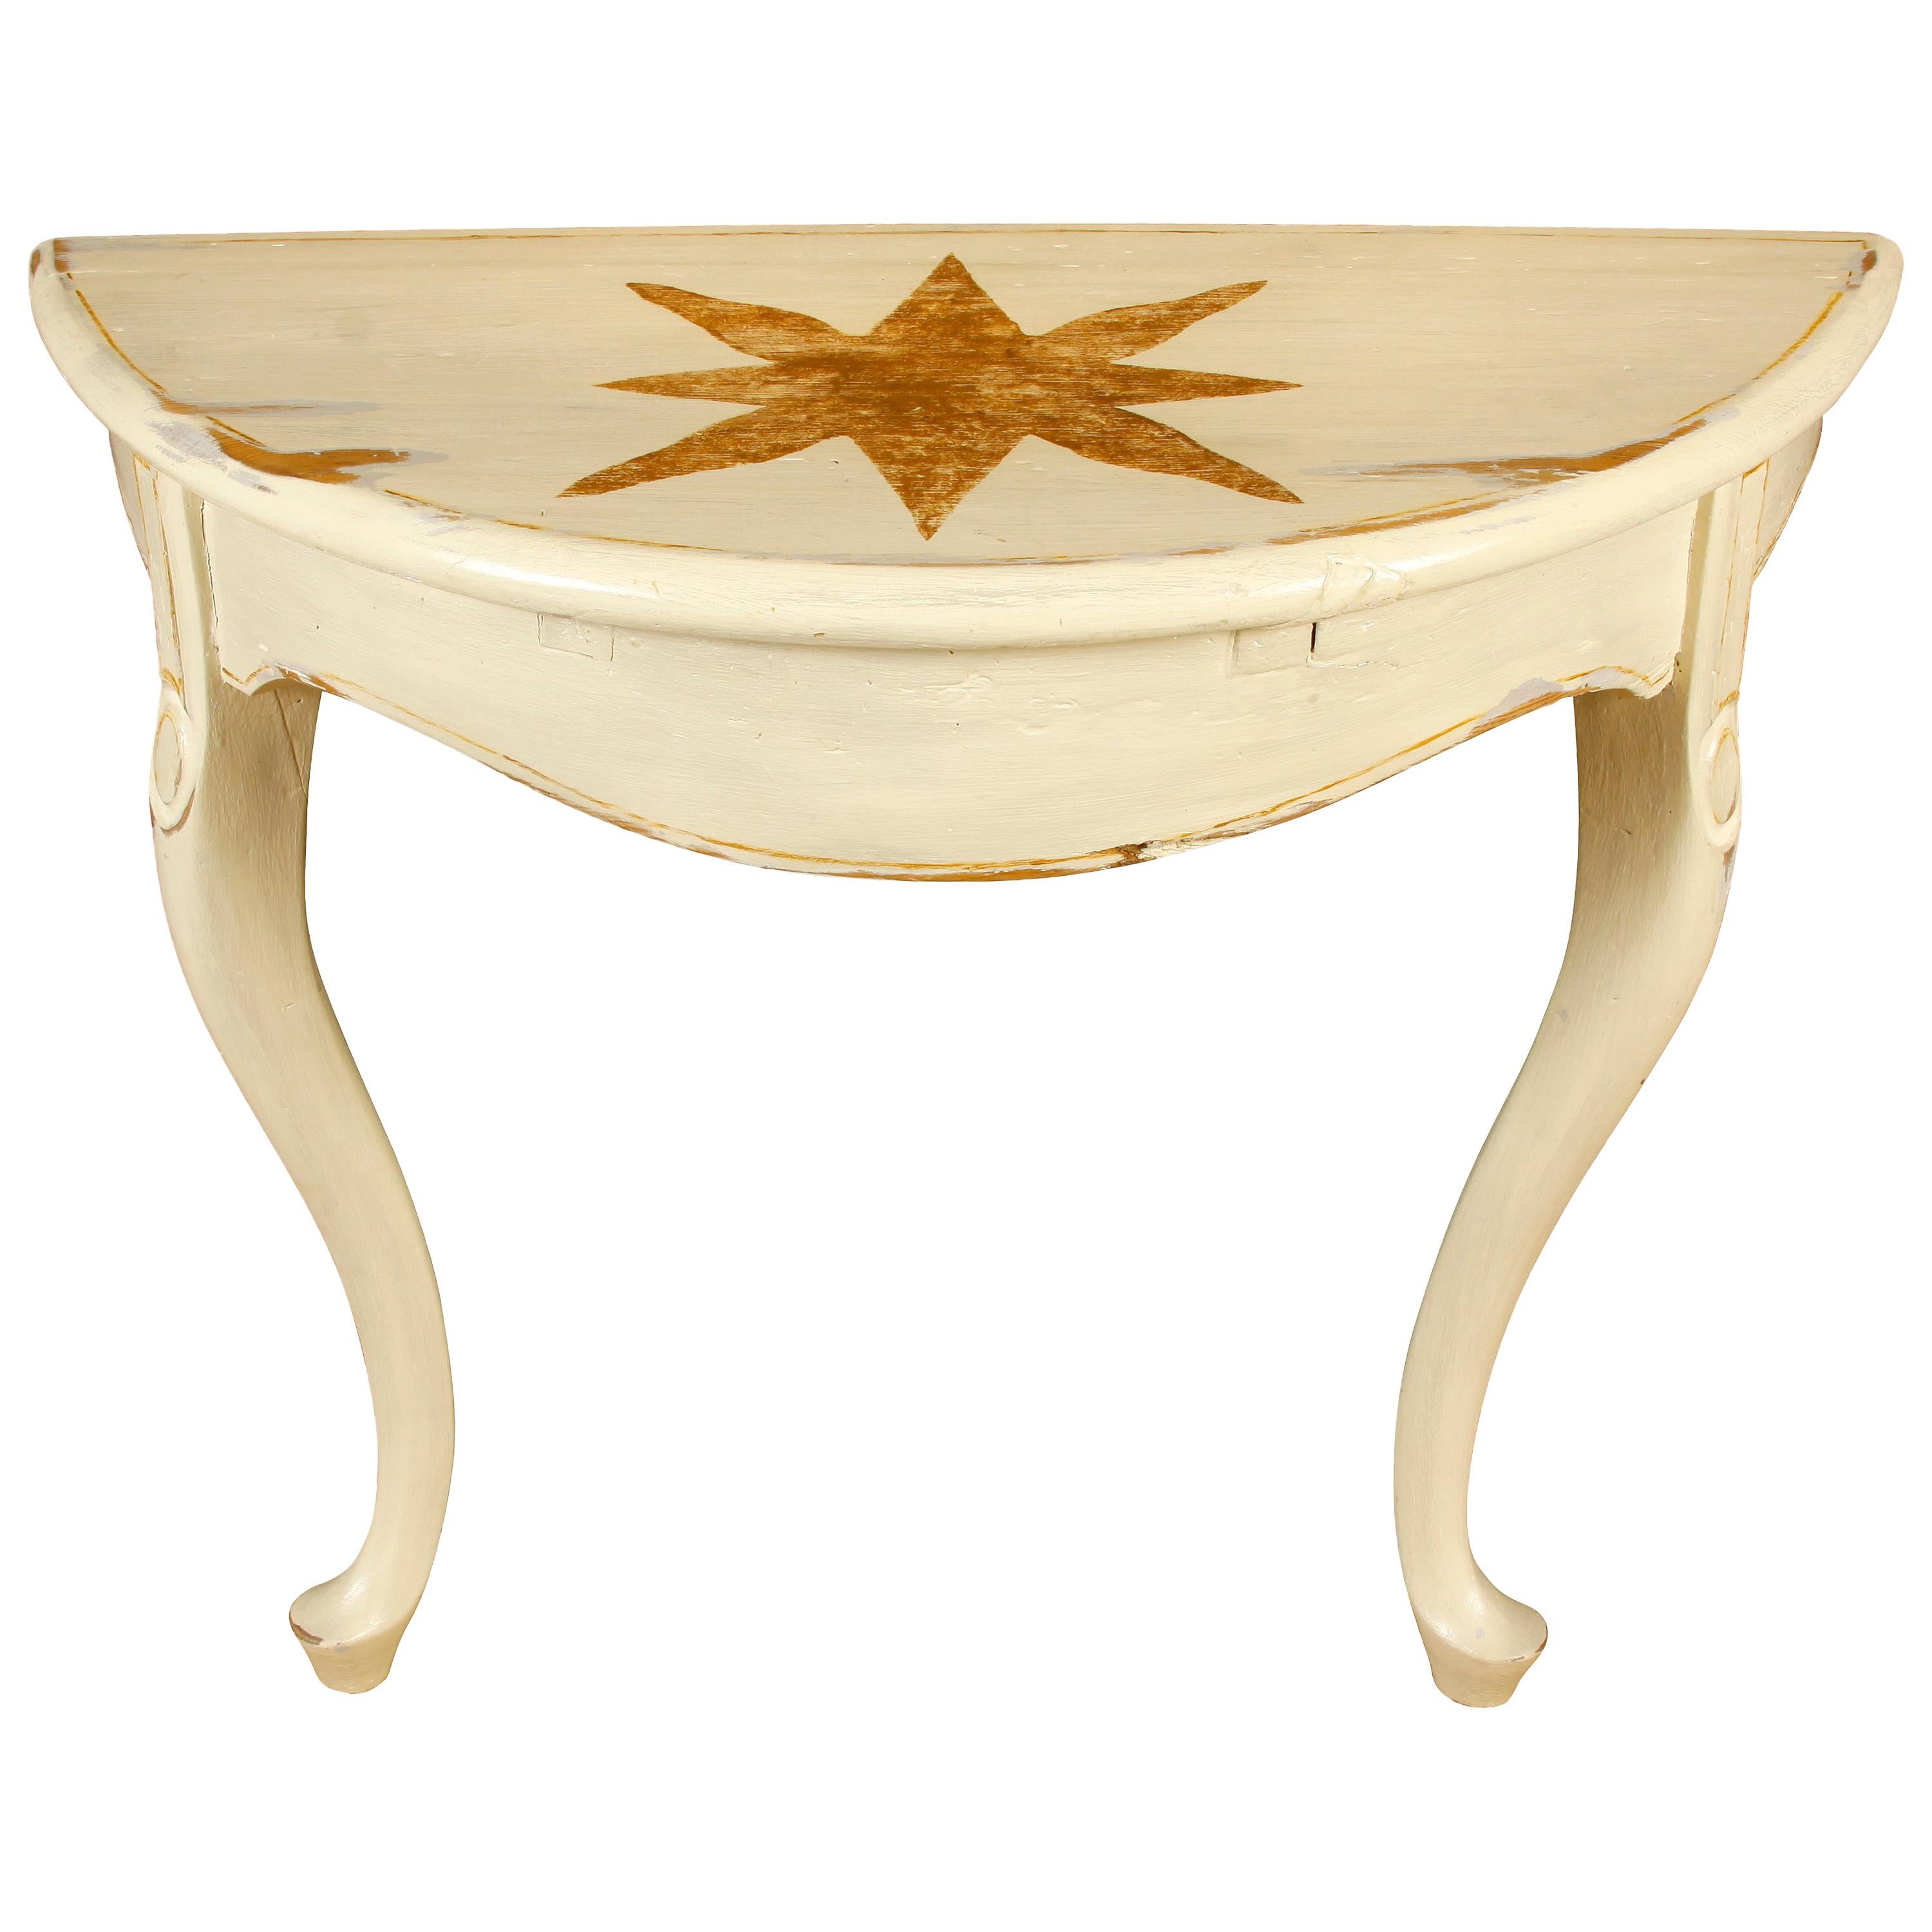 Pair of Hand Painted Star Cream Demilune Tables